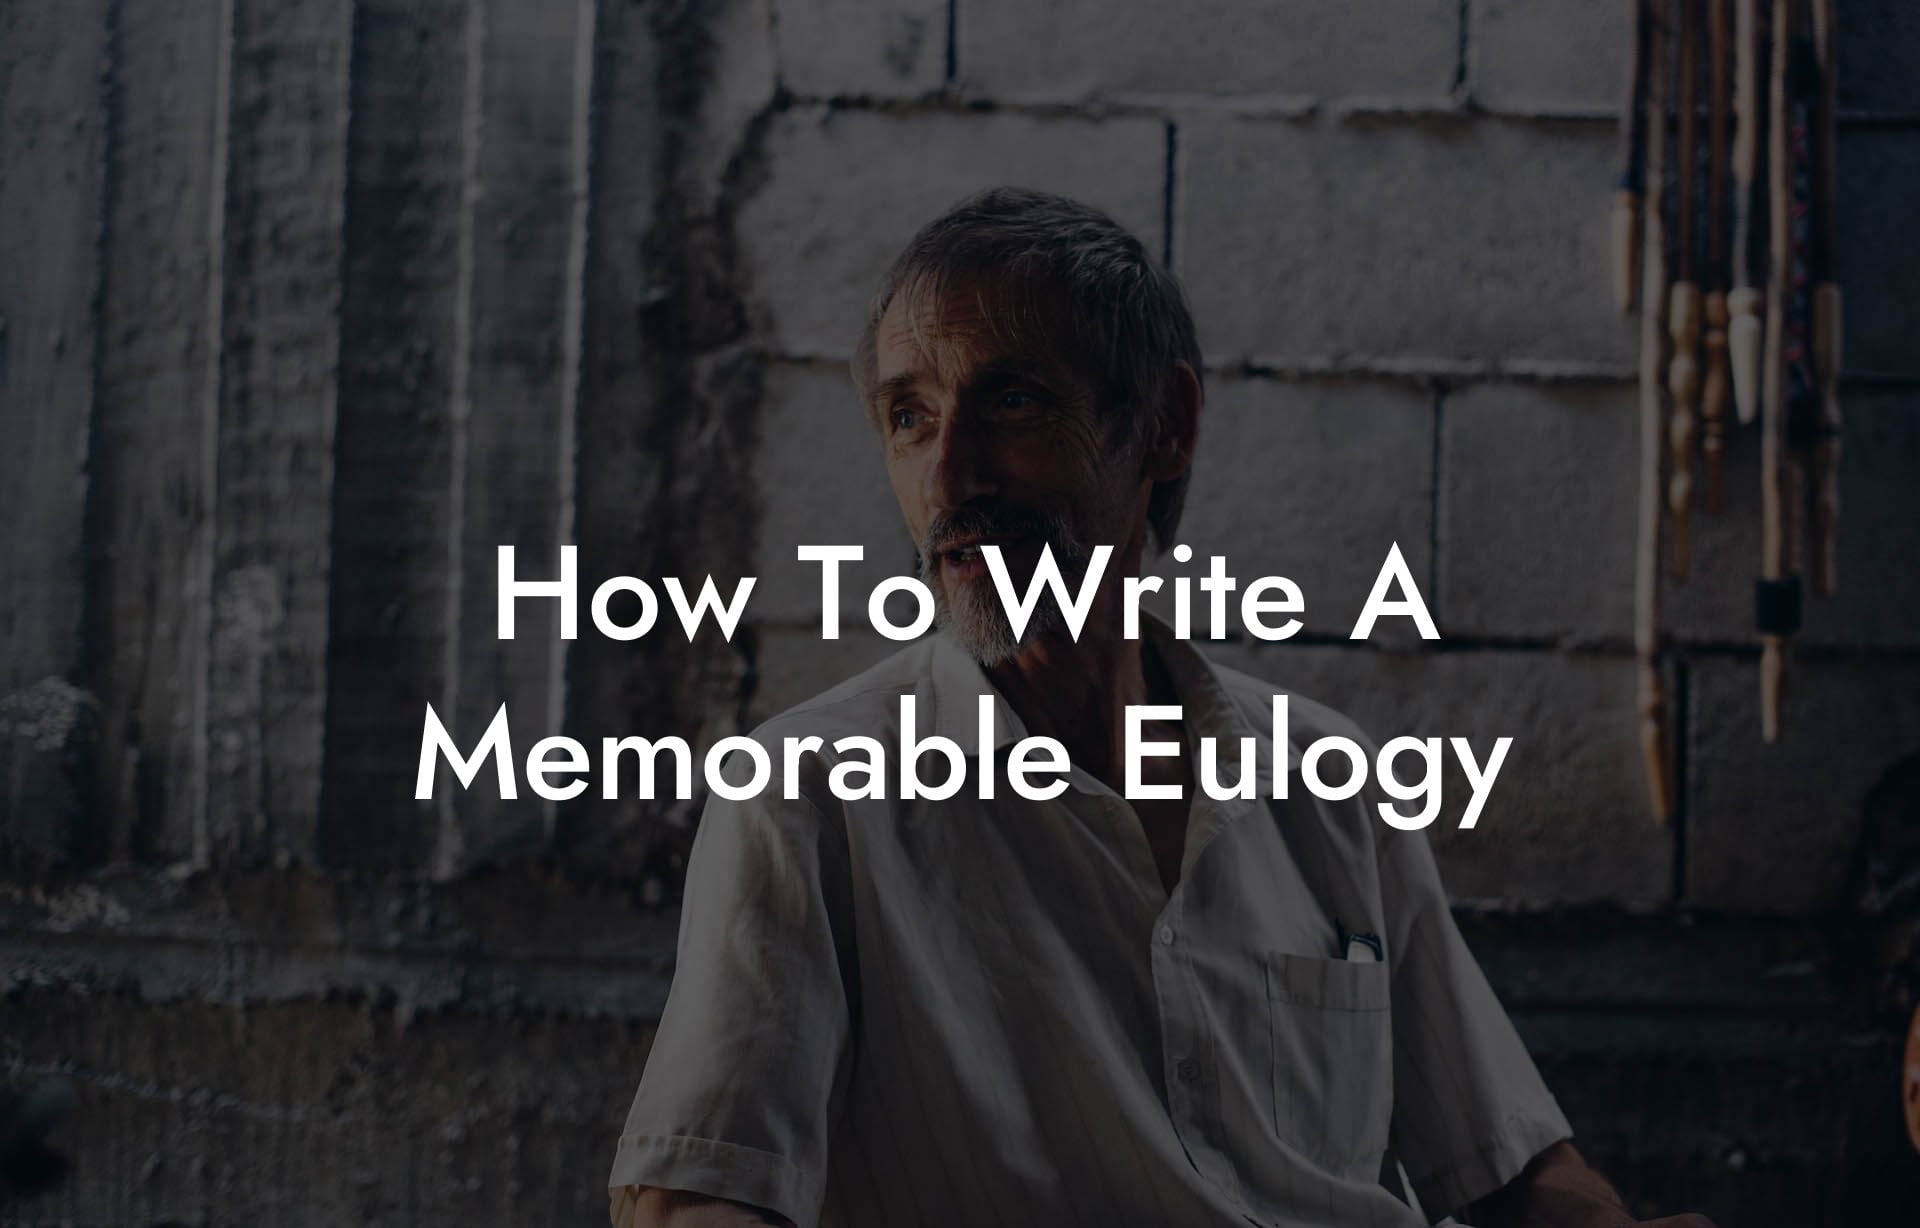 How To Write A Memorable Eulogy